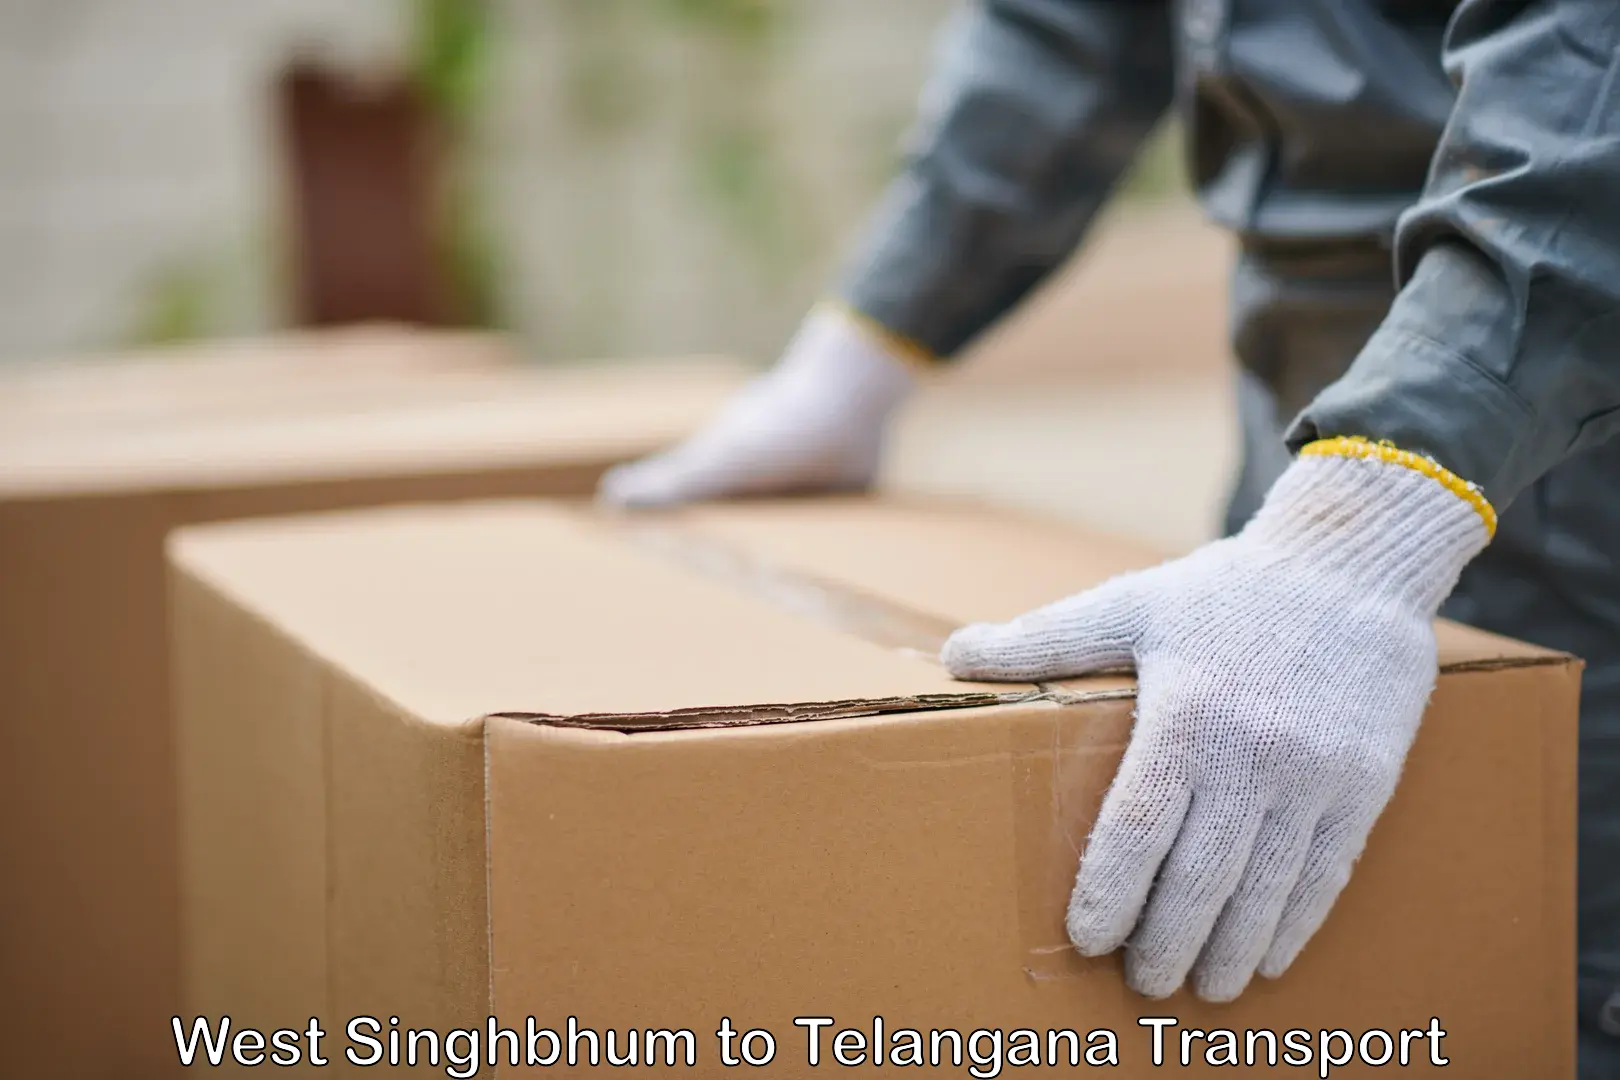 Land transport services in West Singhbhum to Danthalapally